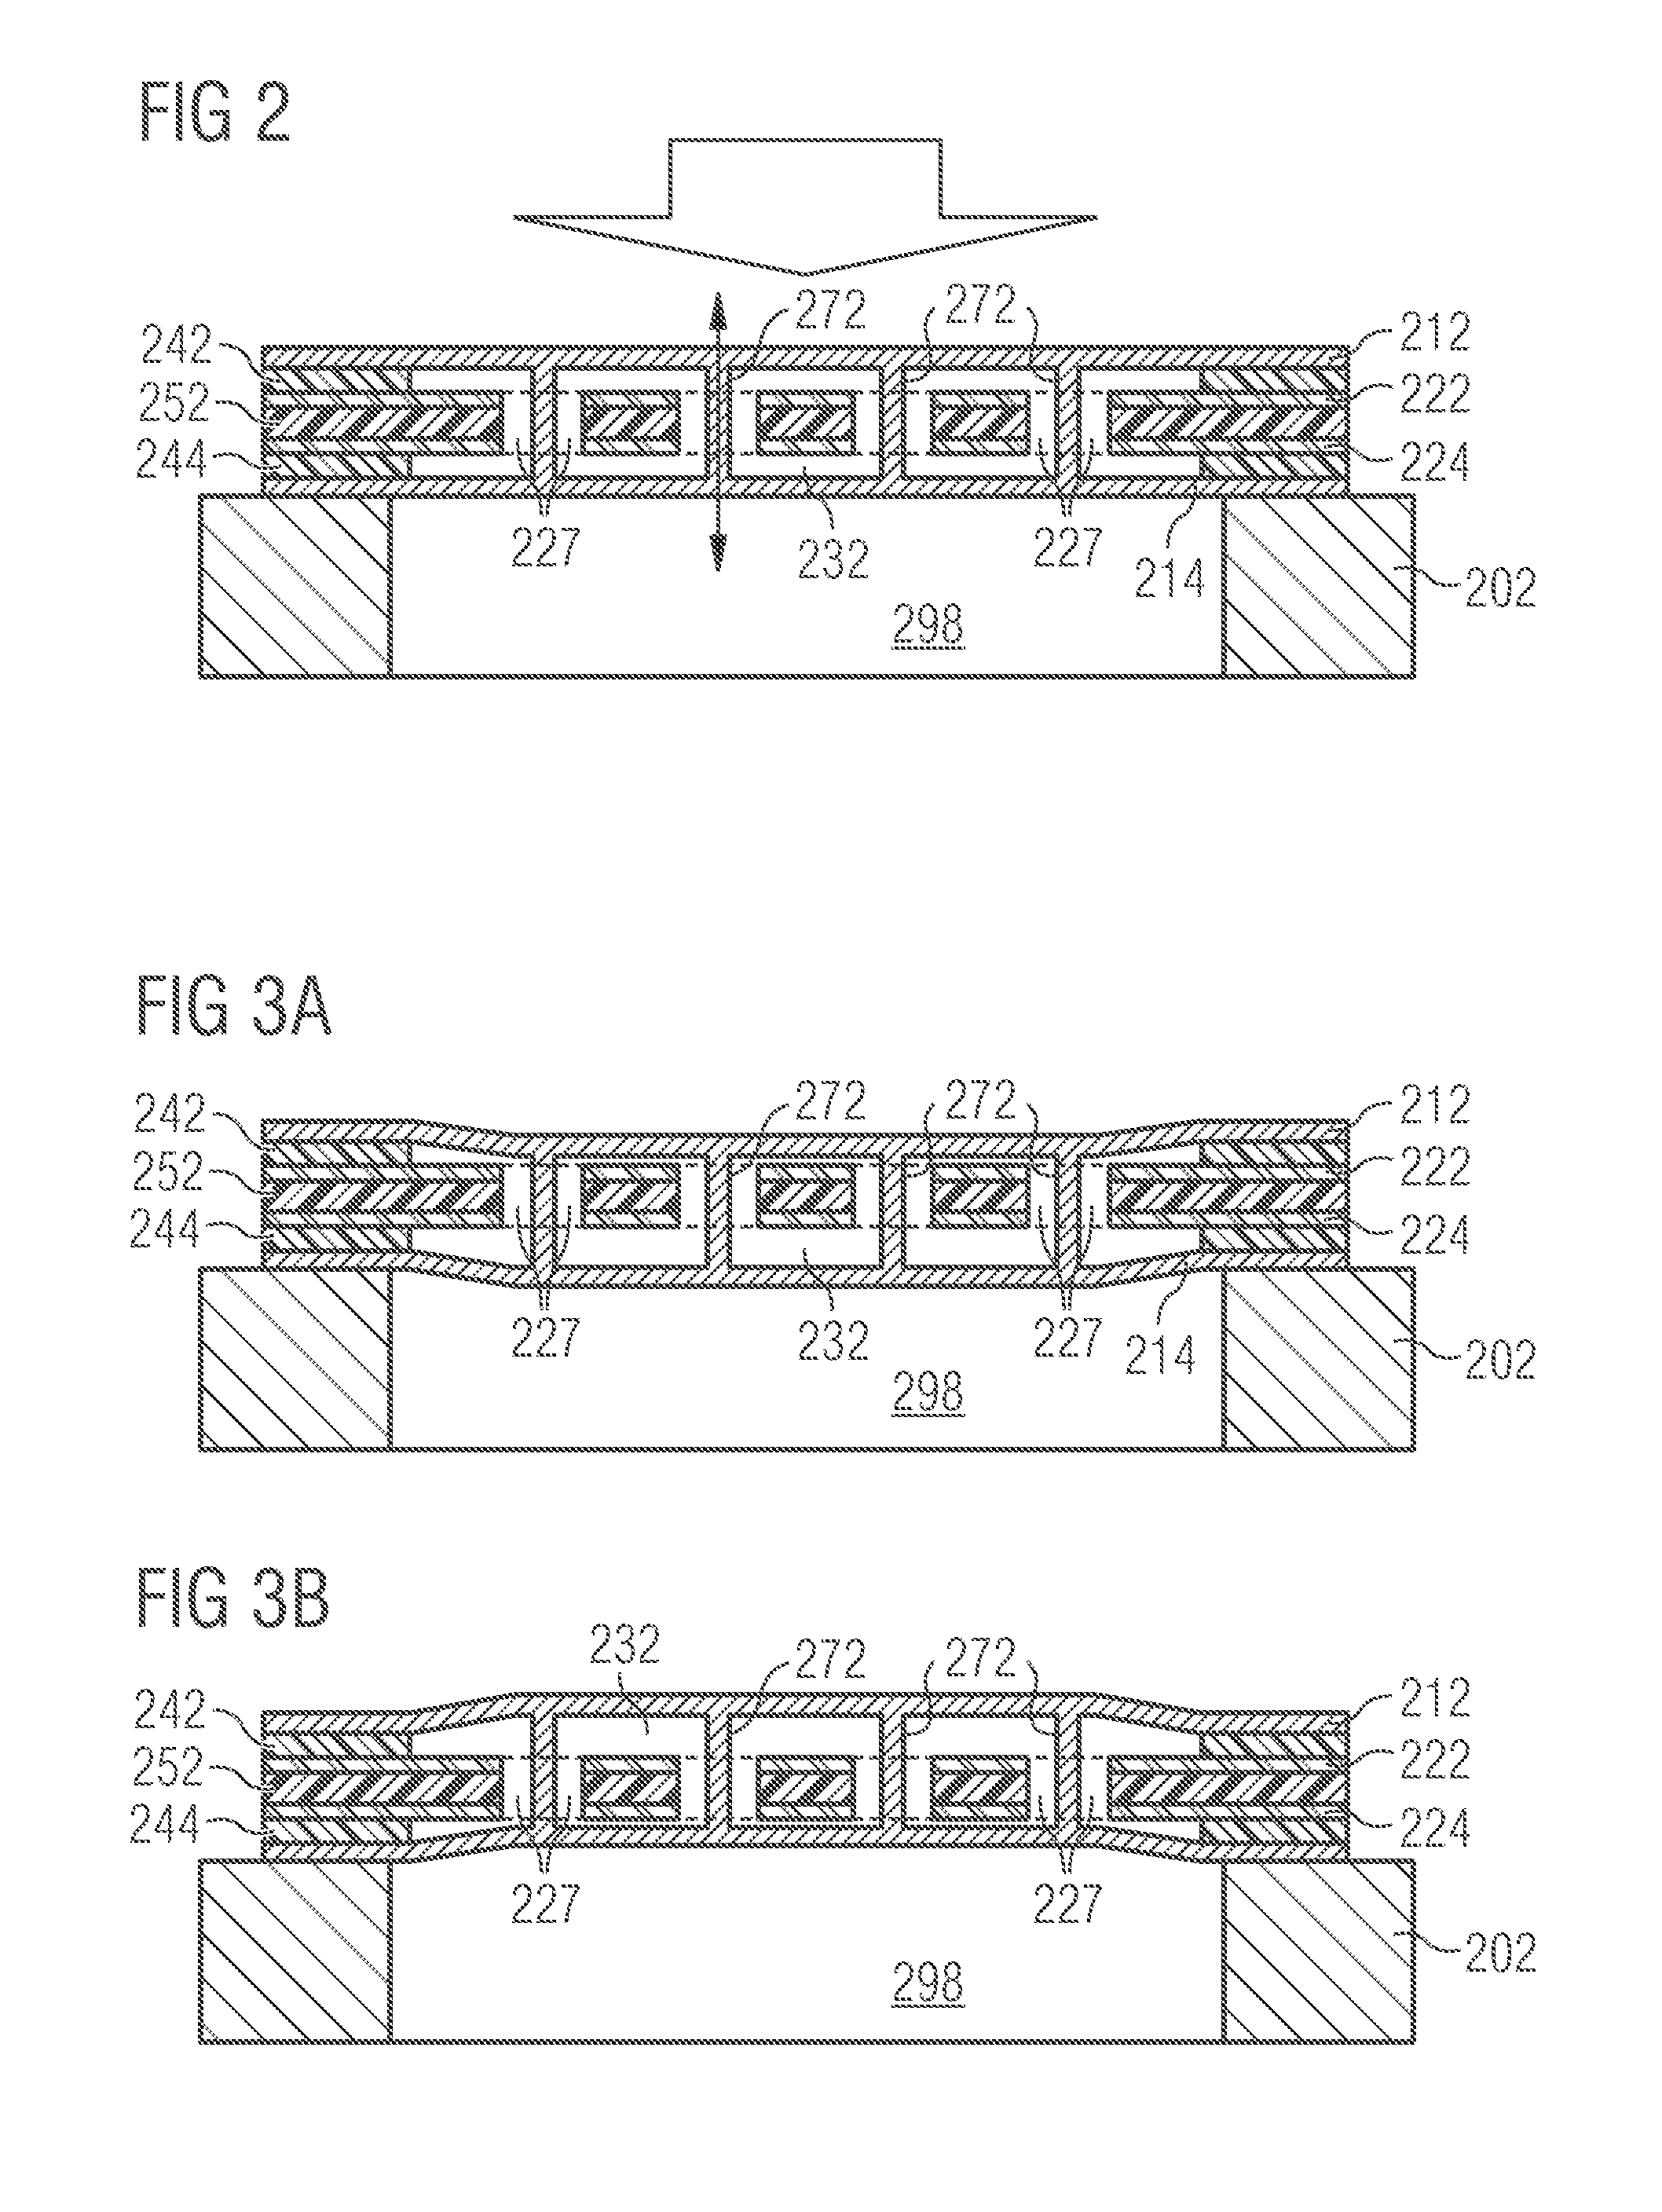 MEMS Microphone with Low Pressure Region Between Diaphragm and Counter Electrode